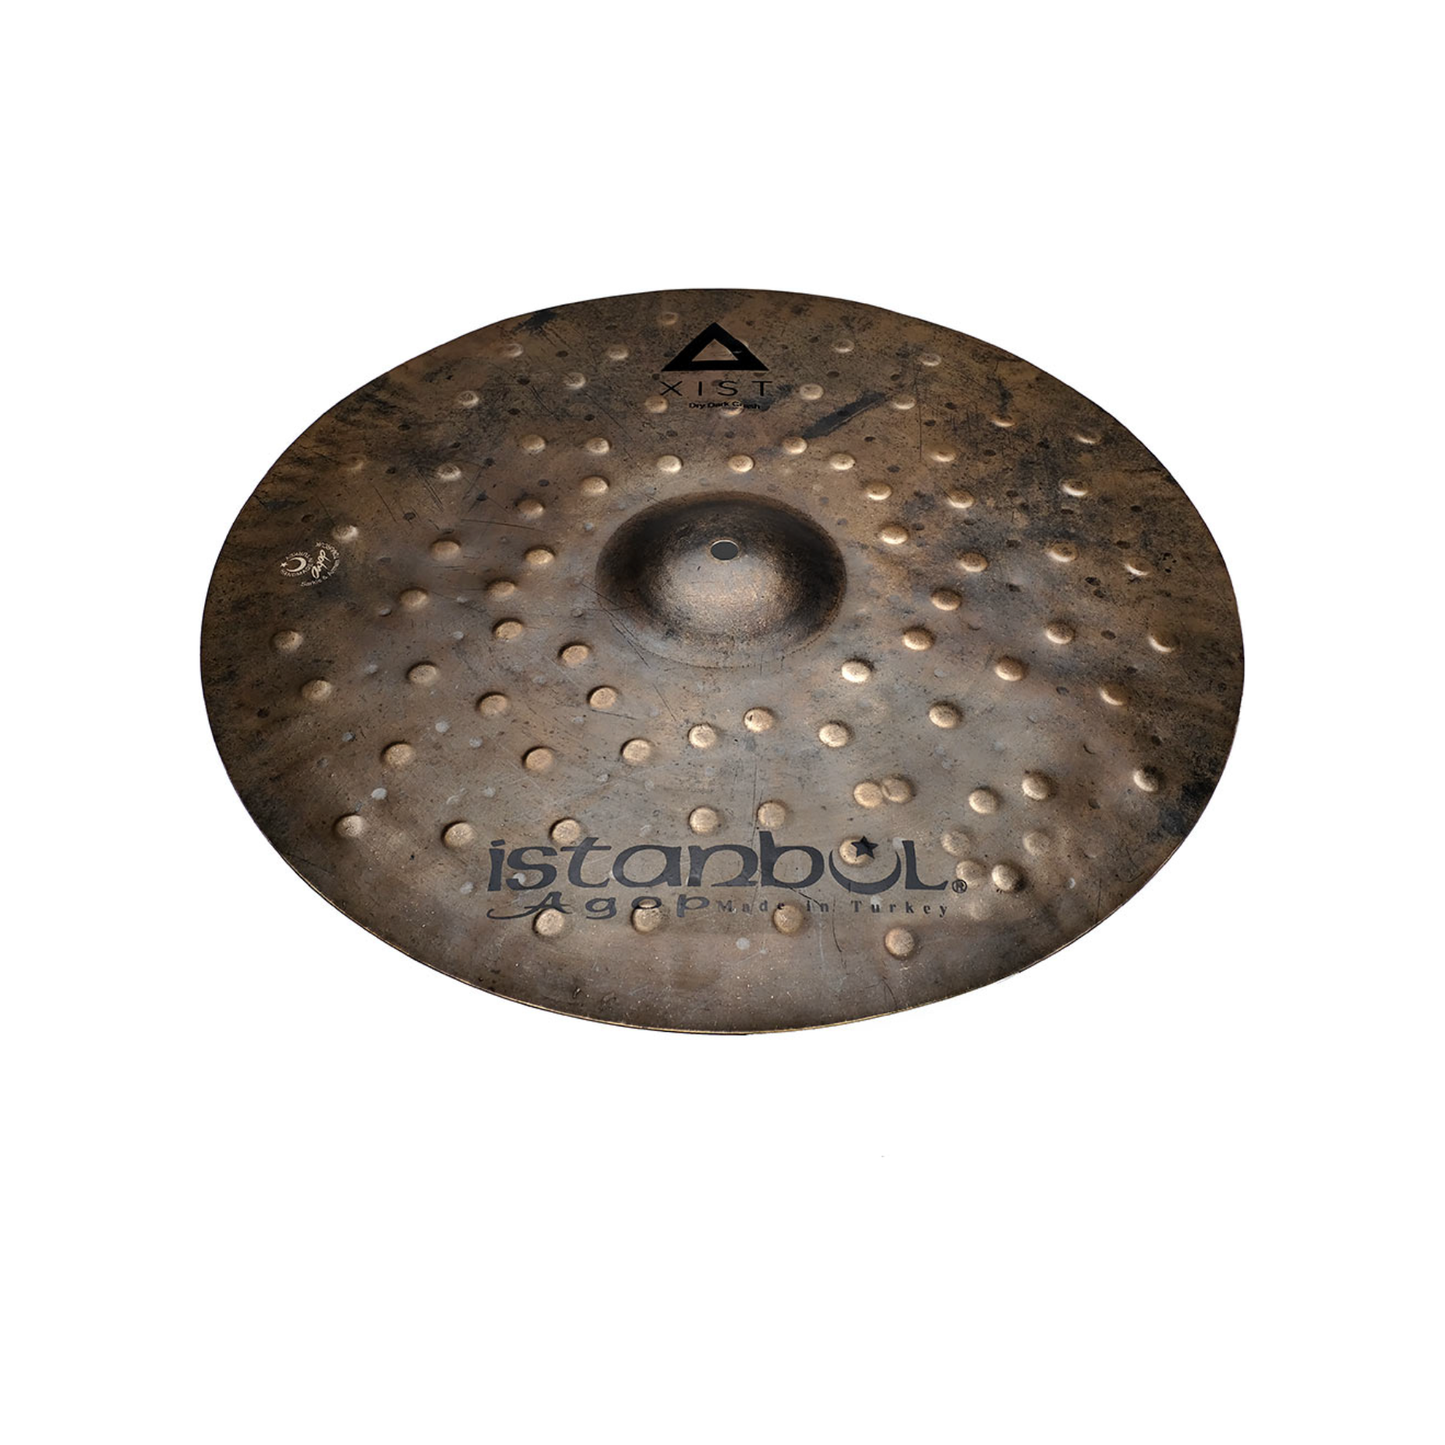 Istanbul Crash 17” Xist Dry Oscuro